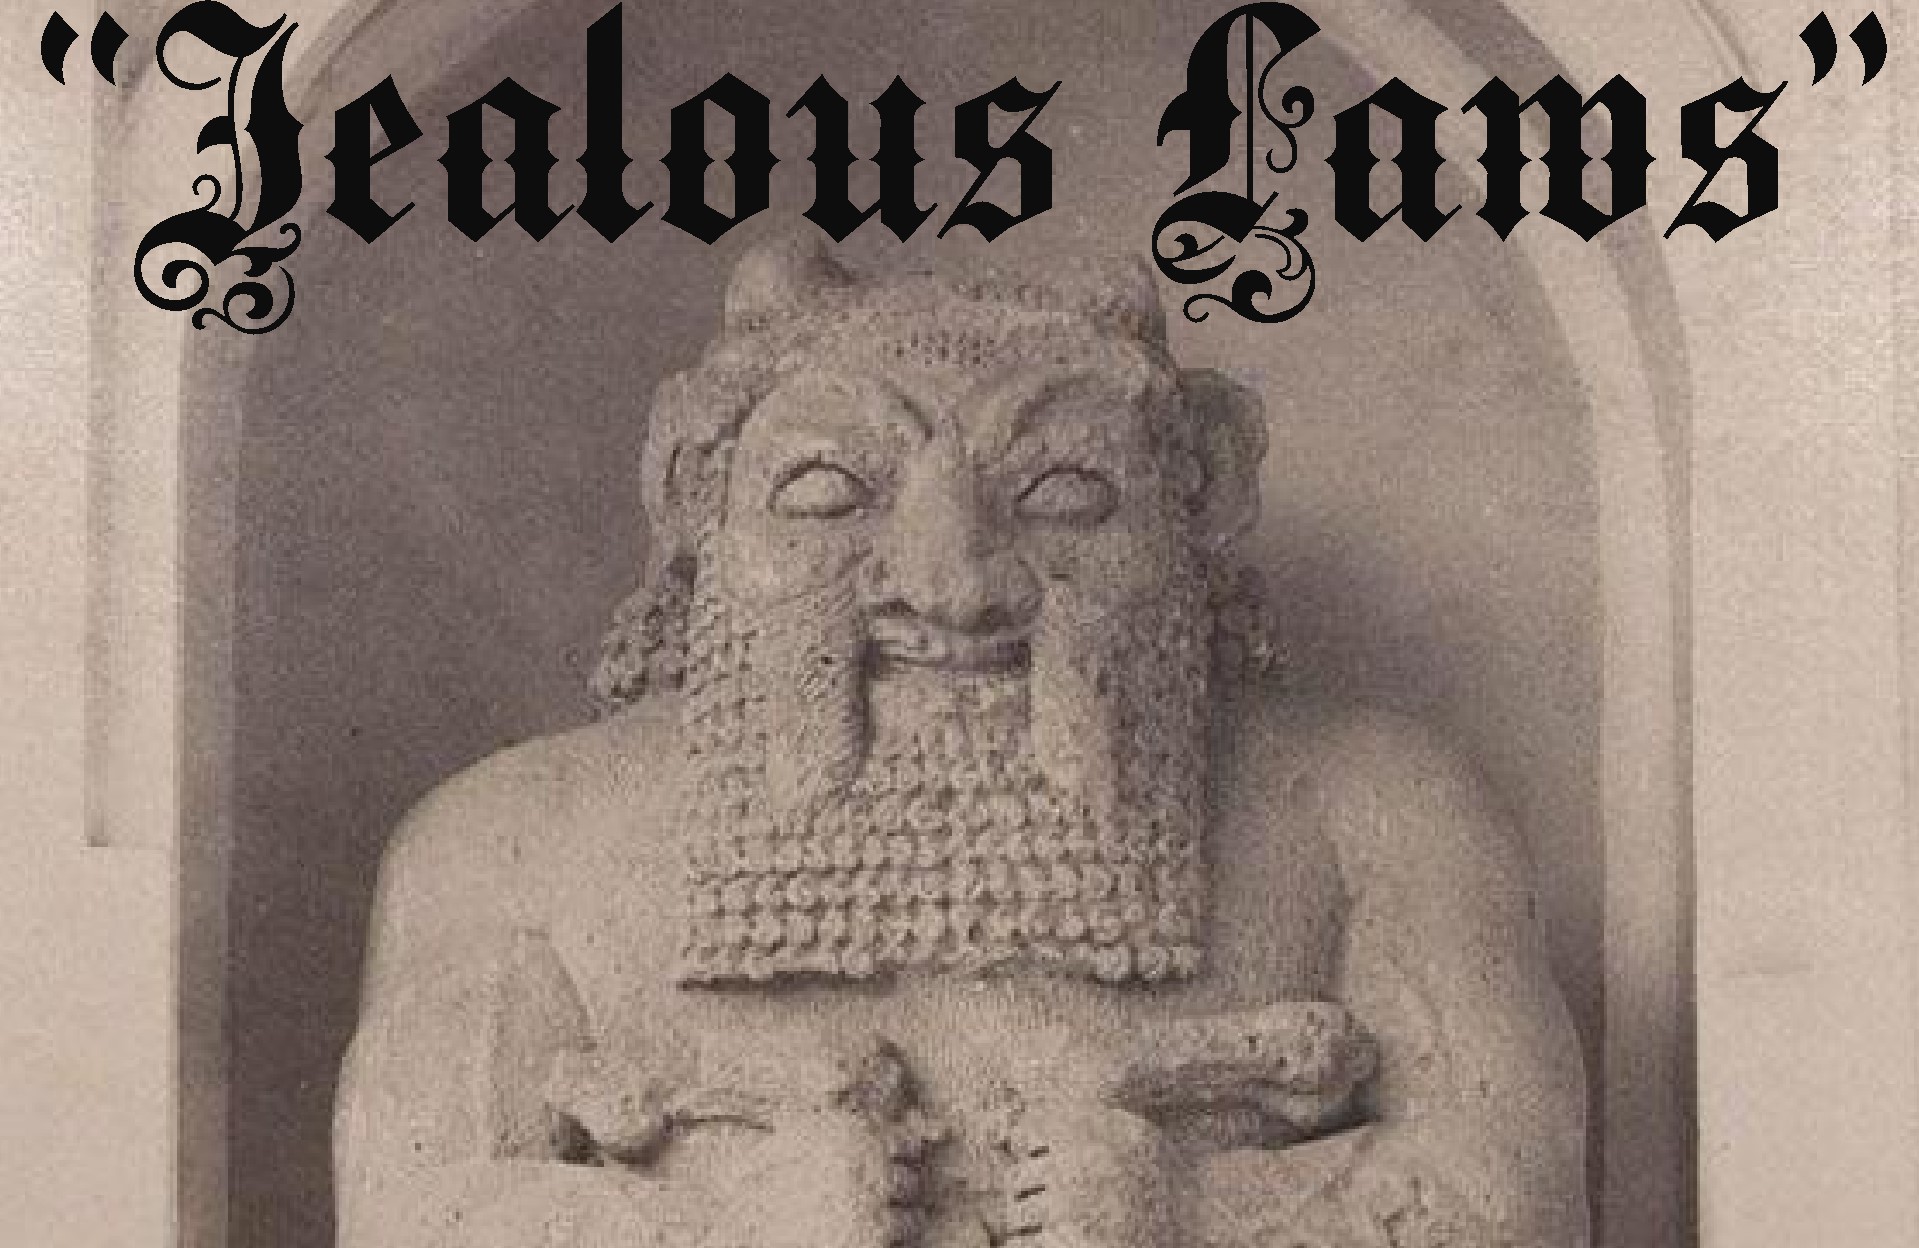 Grainy photo of a stone sculpture of a bearded figure, with 'Jealous Laws' written on the top in black Gothic script.